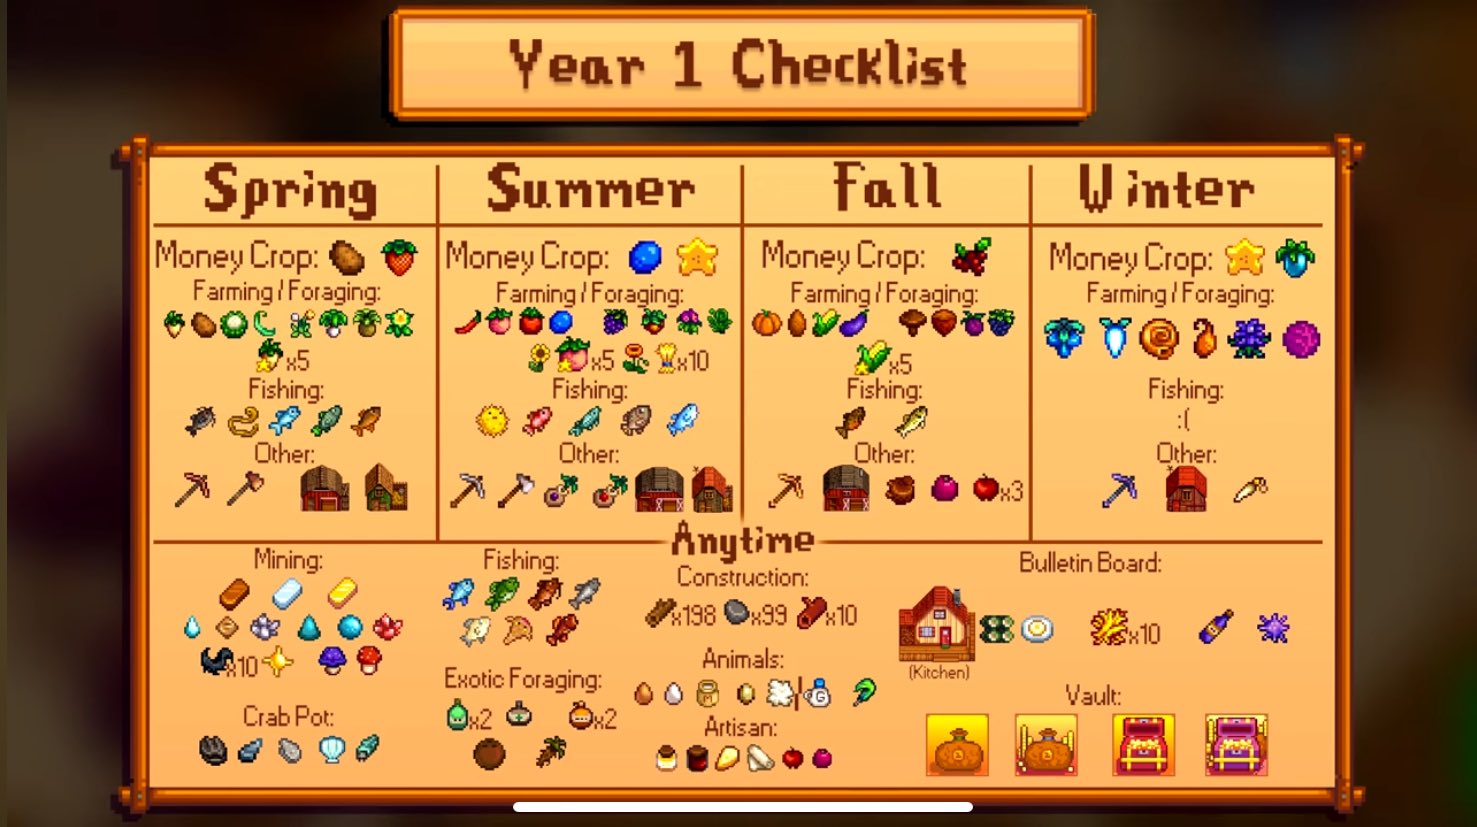 Johat 🩷 on X: I had fun playing stardew valley yesterday. Saw this  checklist from Salmence and I will try to finish the community center in a  year! Might stream it later